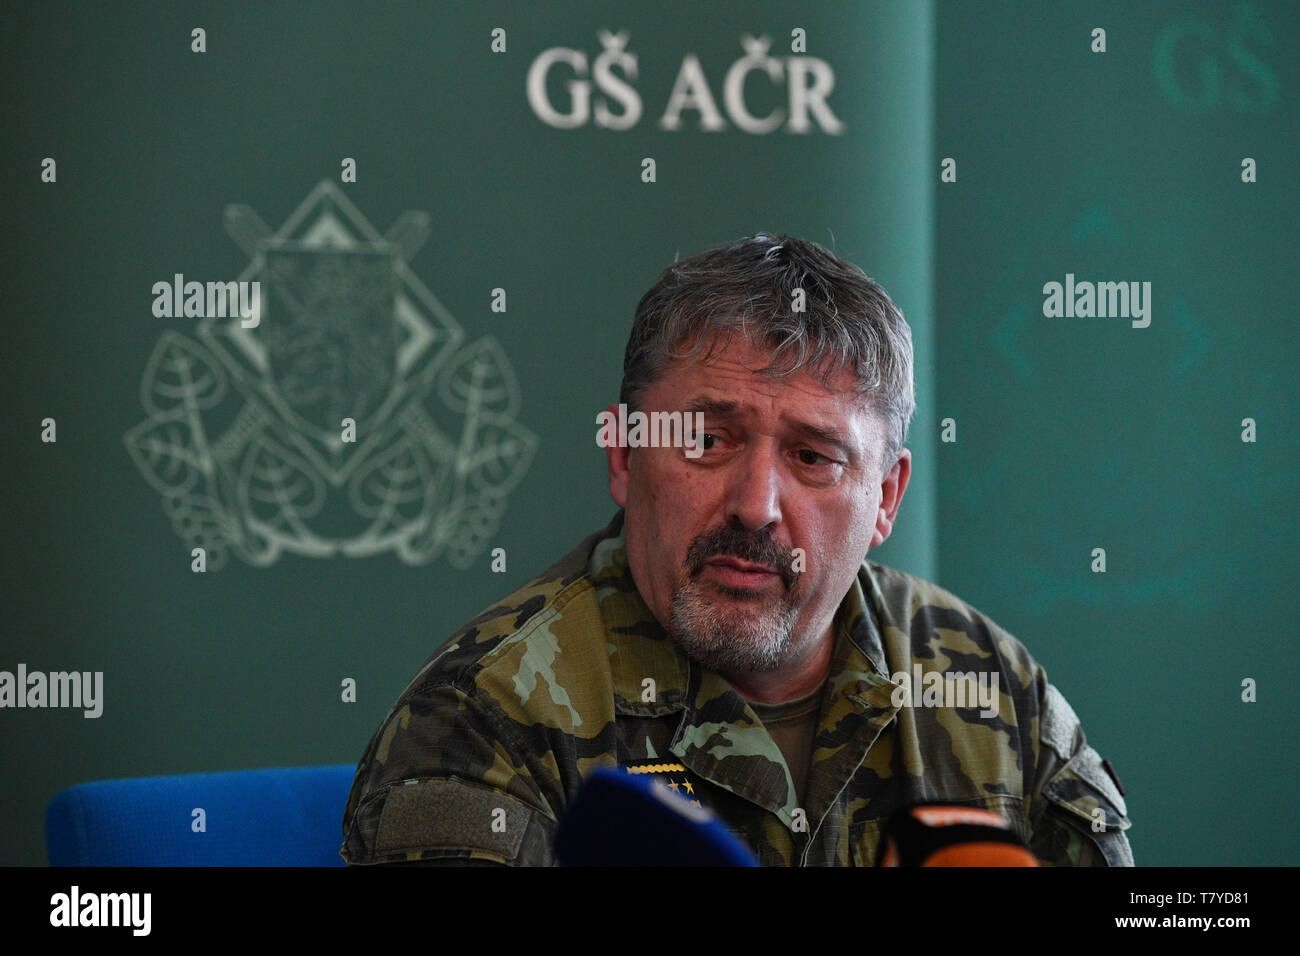 General Ales Opata, Chief of the General Staff of the Czech Armed Forces, speaks during a press conference on his first year in office, in Prague, Cze Stock Photo